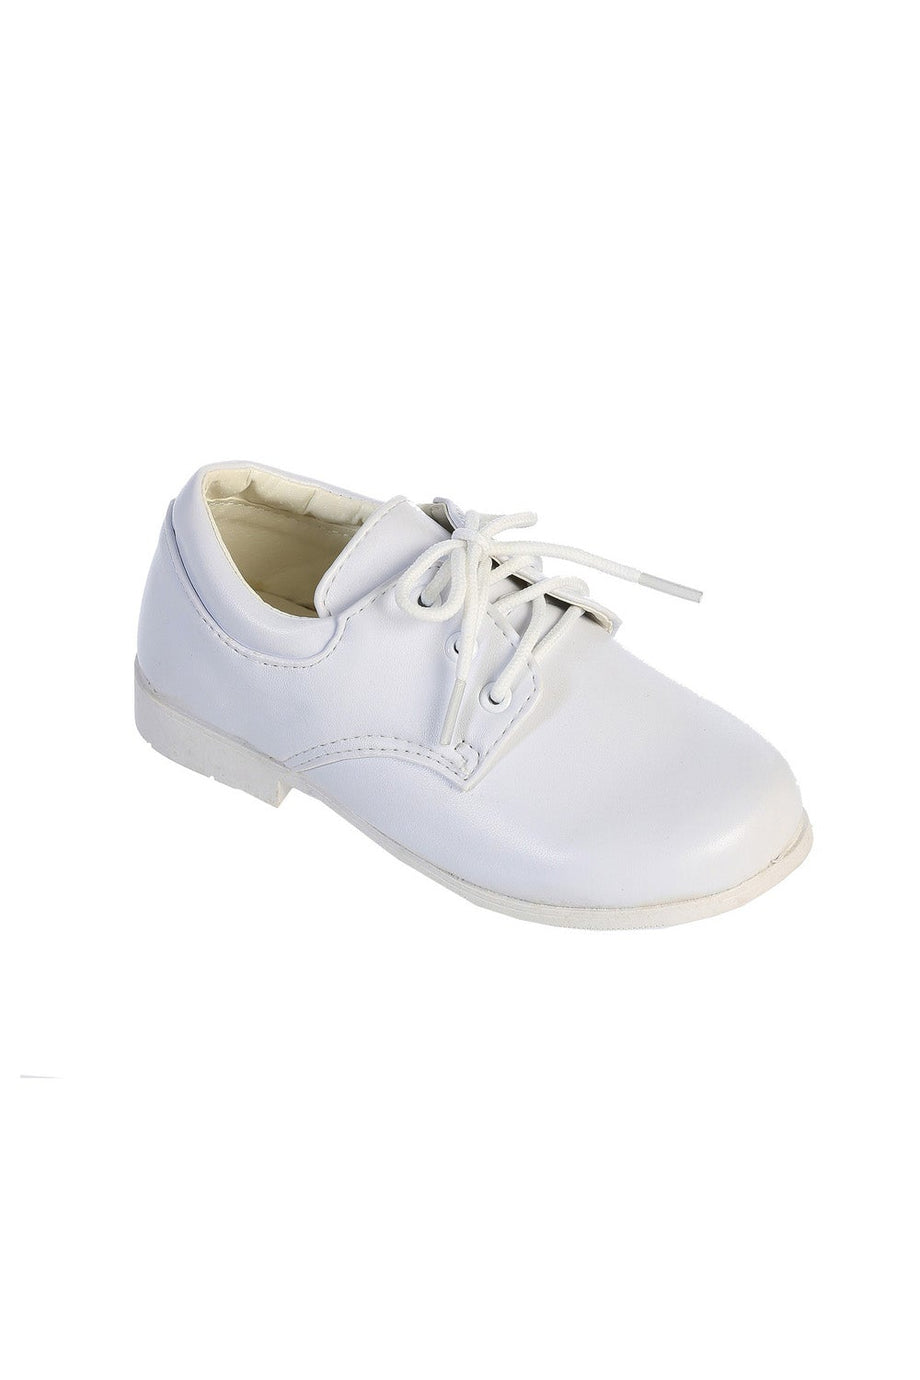 Tip Top "Vista" Kids White Matte Round Toe Lace Up Shoes